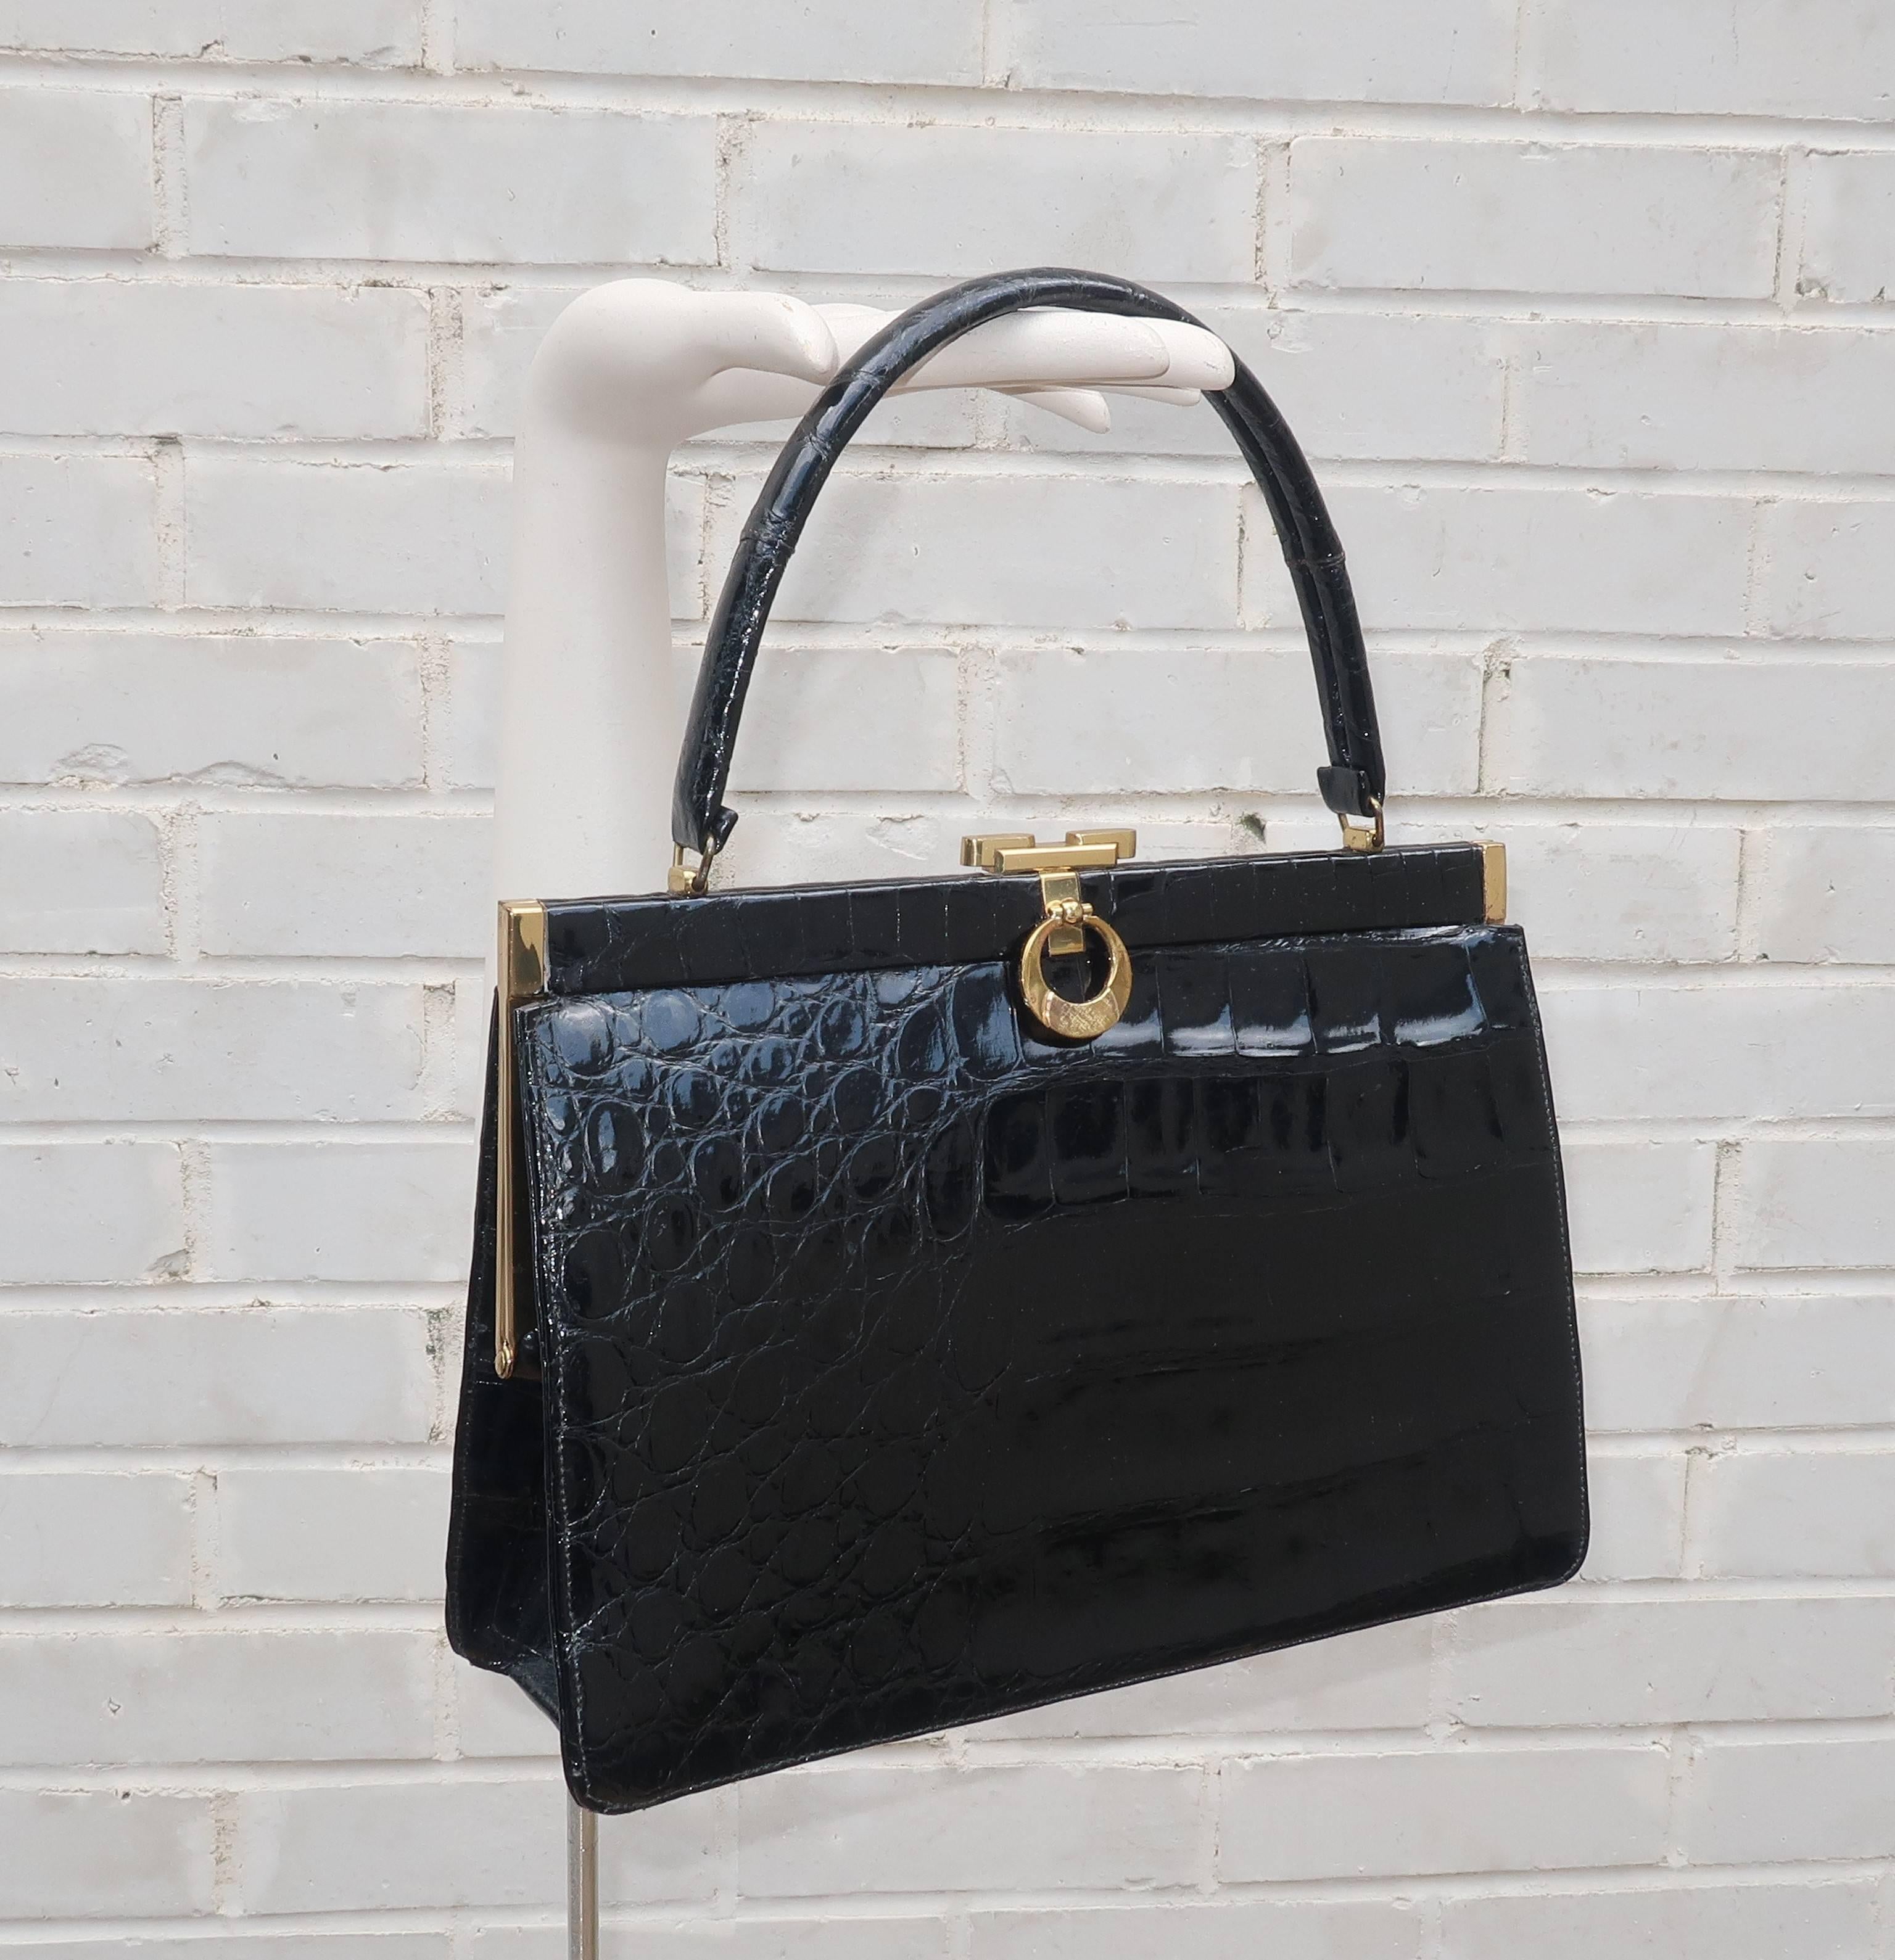 This 1950’s Bellestone black alligator handbag would be perfect for an Alfred Hitchcock heroine ... think Grace Kelly, Tippi Hedren or Kim Novak.  The classic top handle silhouette has a gold tone frame with a push button closure accented with a